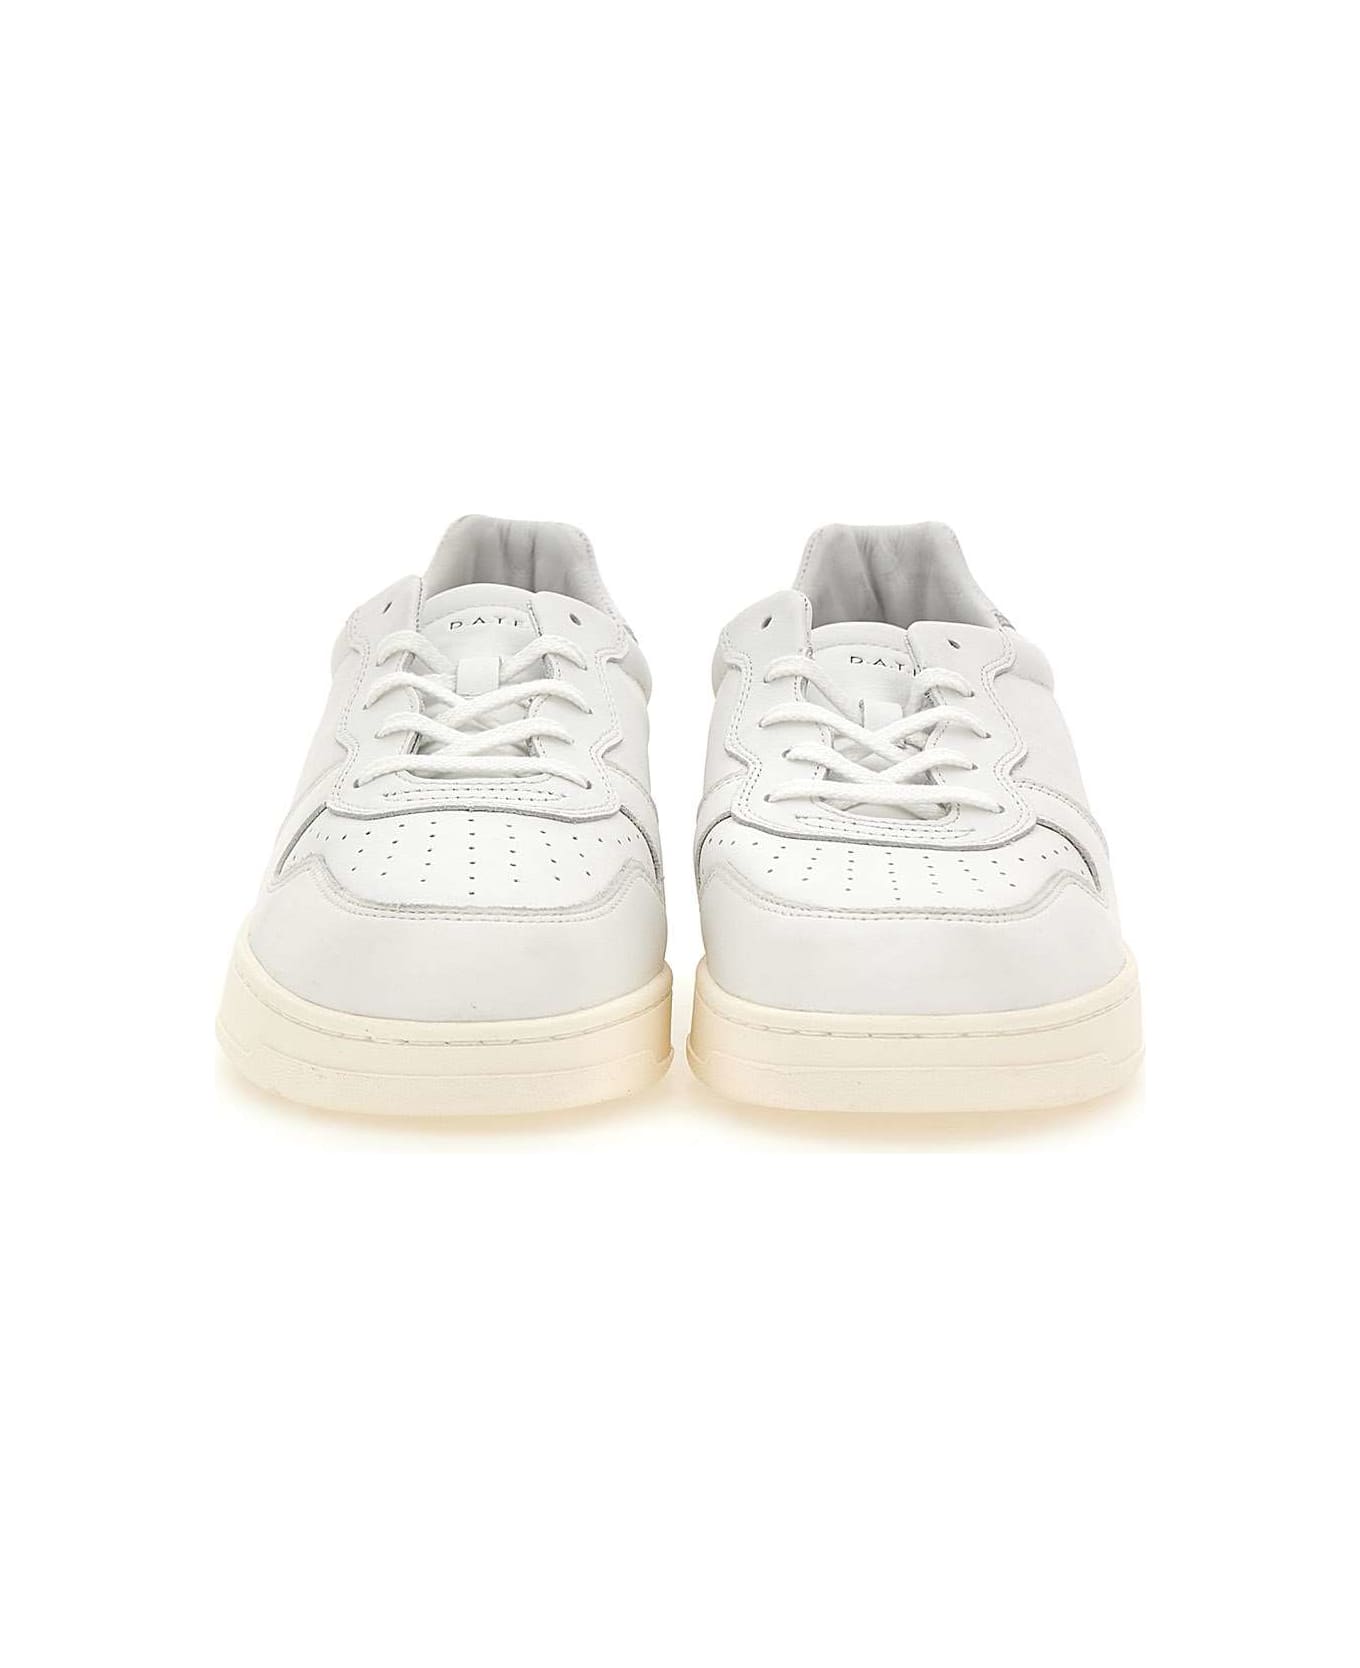 D.A.T.E. "court Calf" Leather Sneakers - WHITE スニーカー